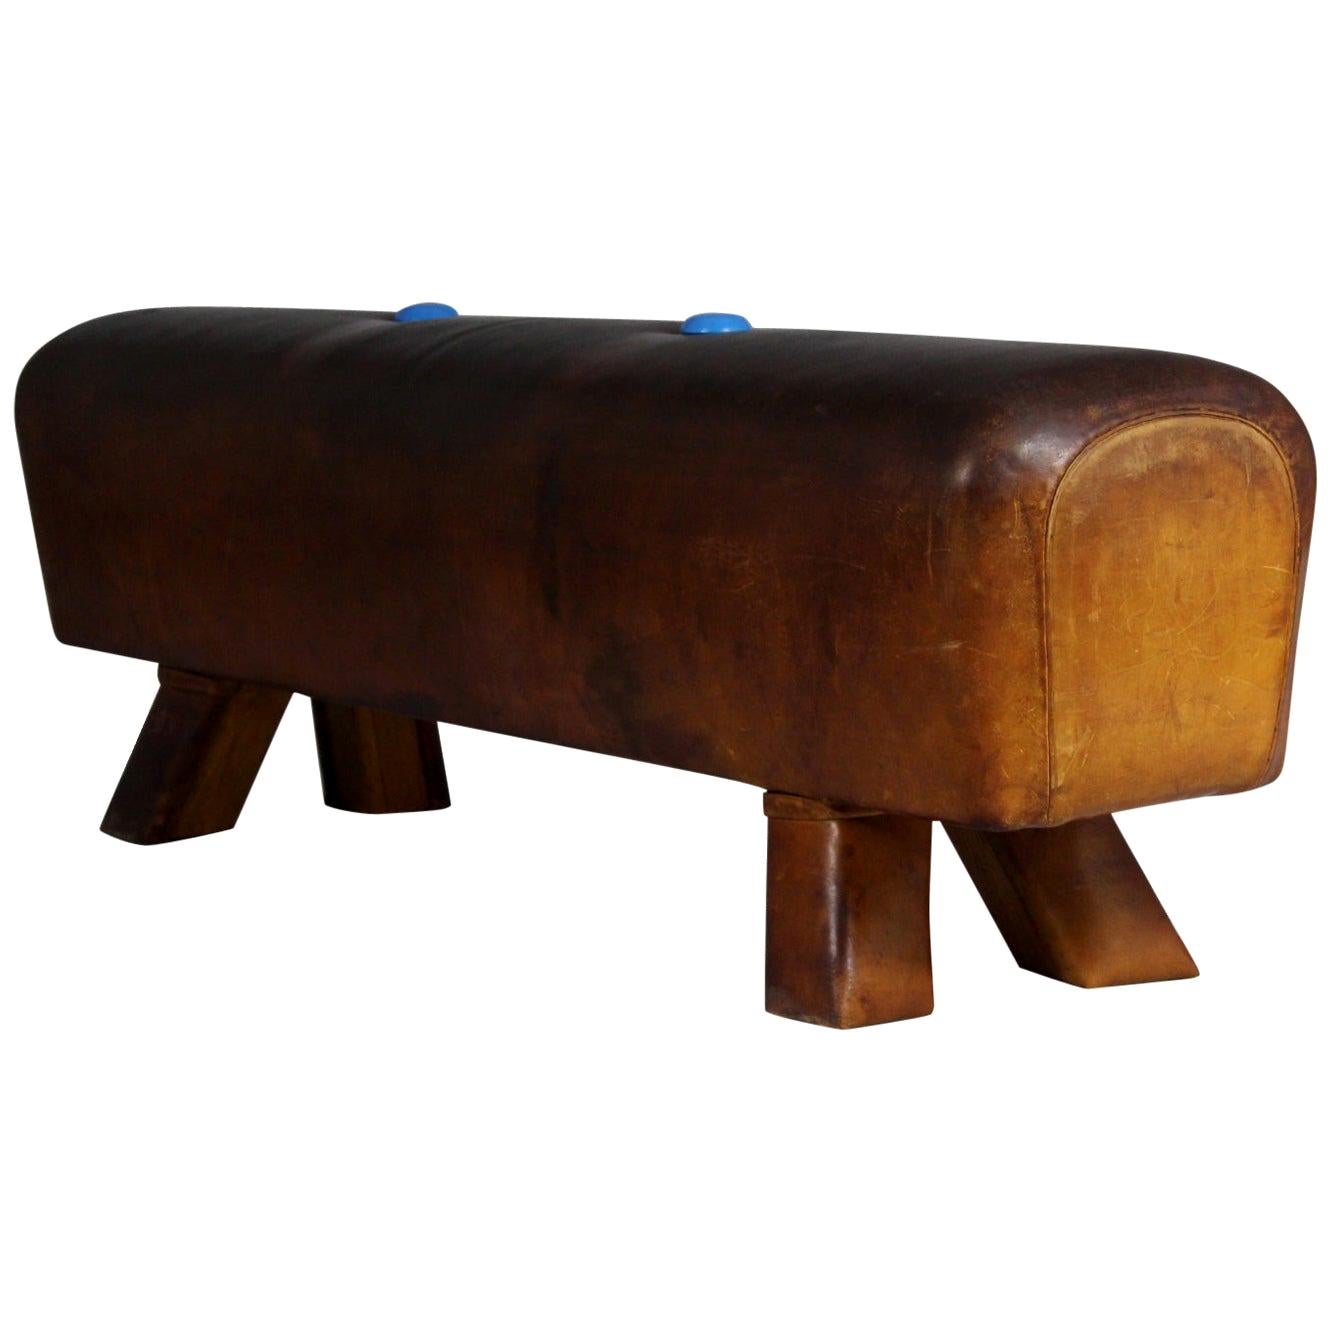 1930s Leather Gym Pommel Horse Bench For Sale